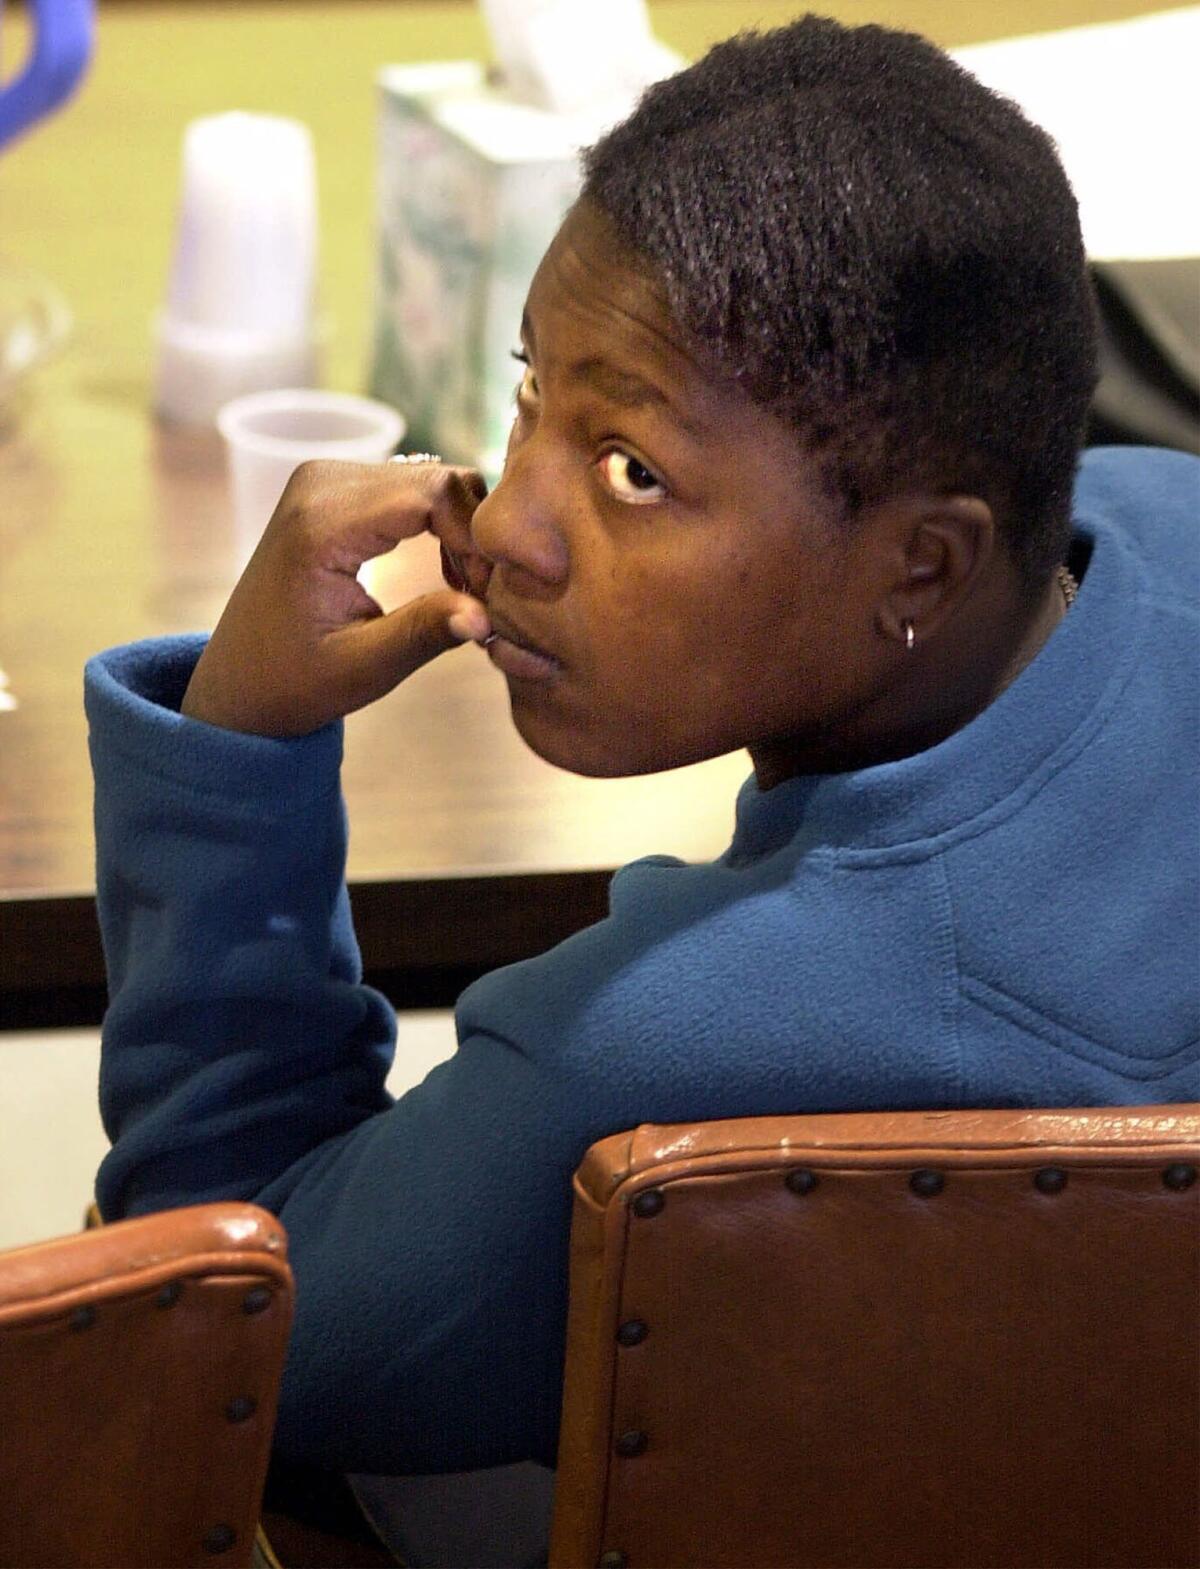 Regina McKnight looks around the courtroom in Conway, S.C., in this 2001 photo. McKnight was convicted that year for killing her unborn child by using crack cocaine during her pregnancy. The state Supreme Court overturned the conviction.